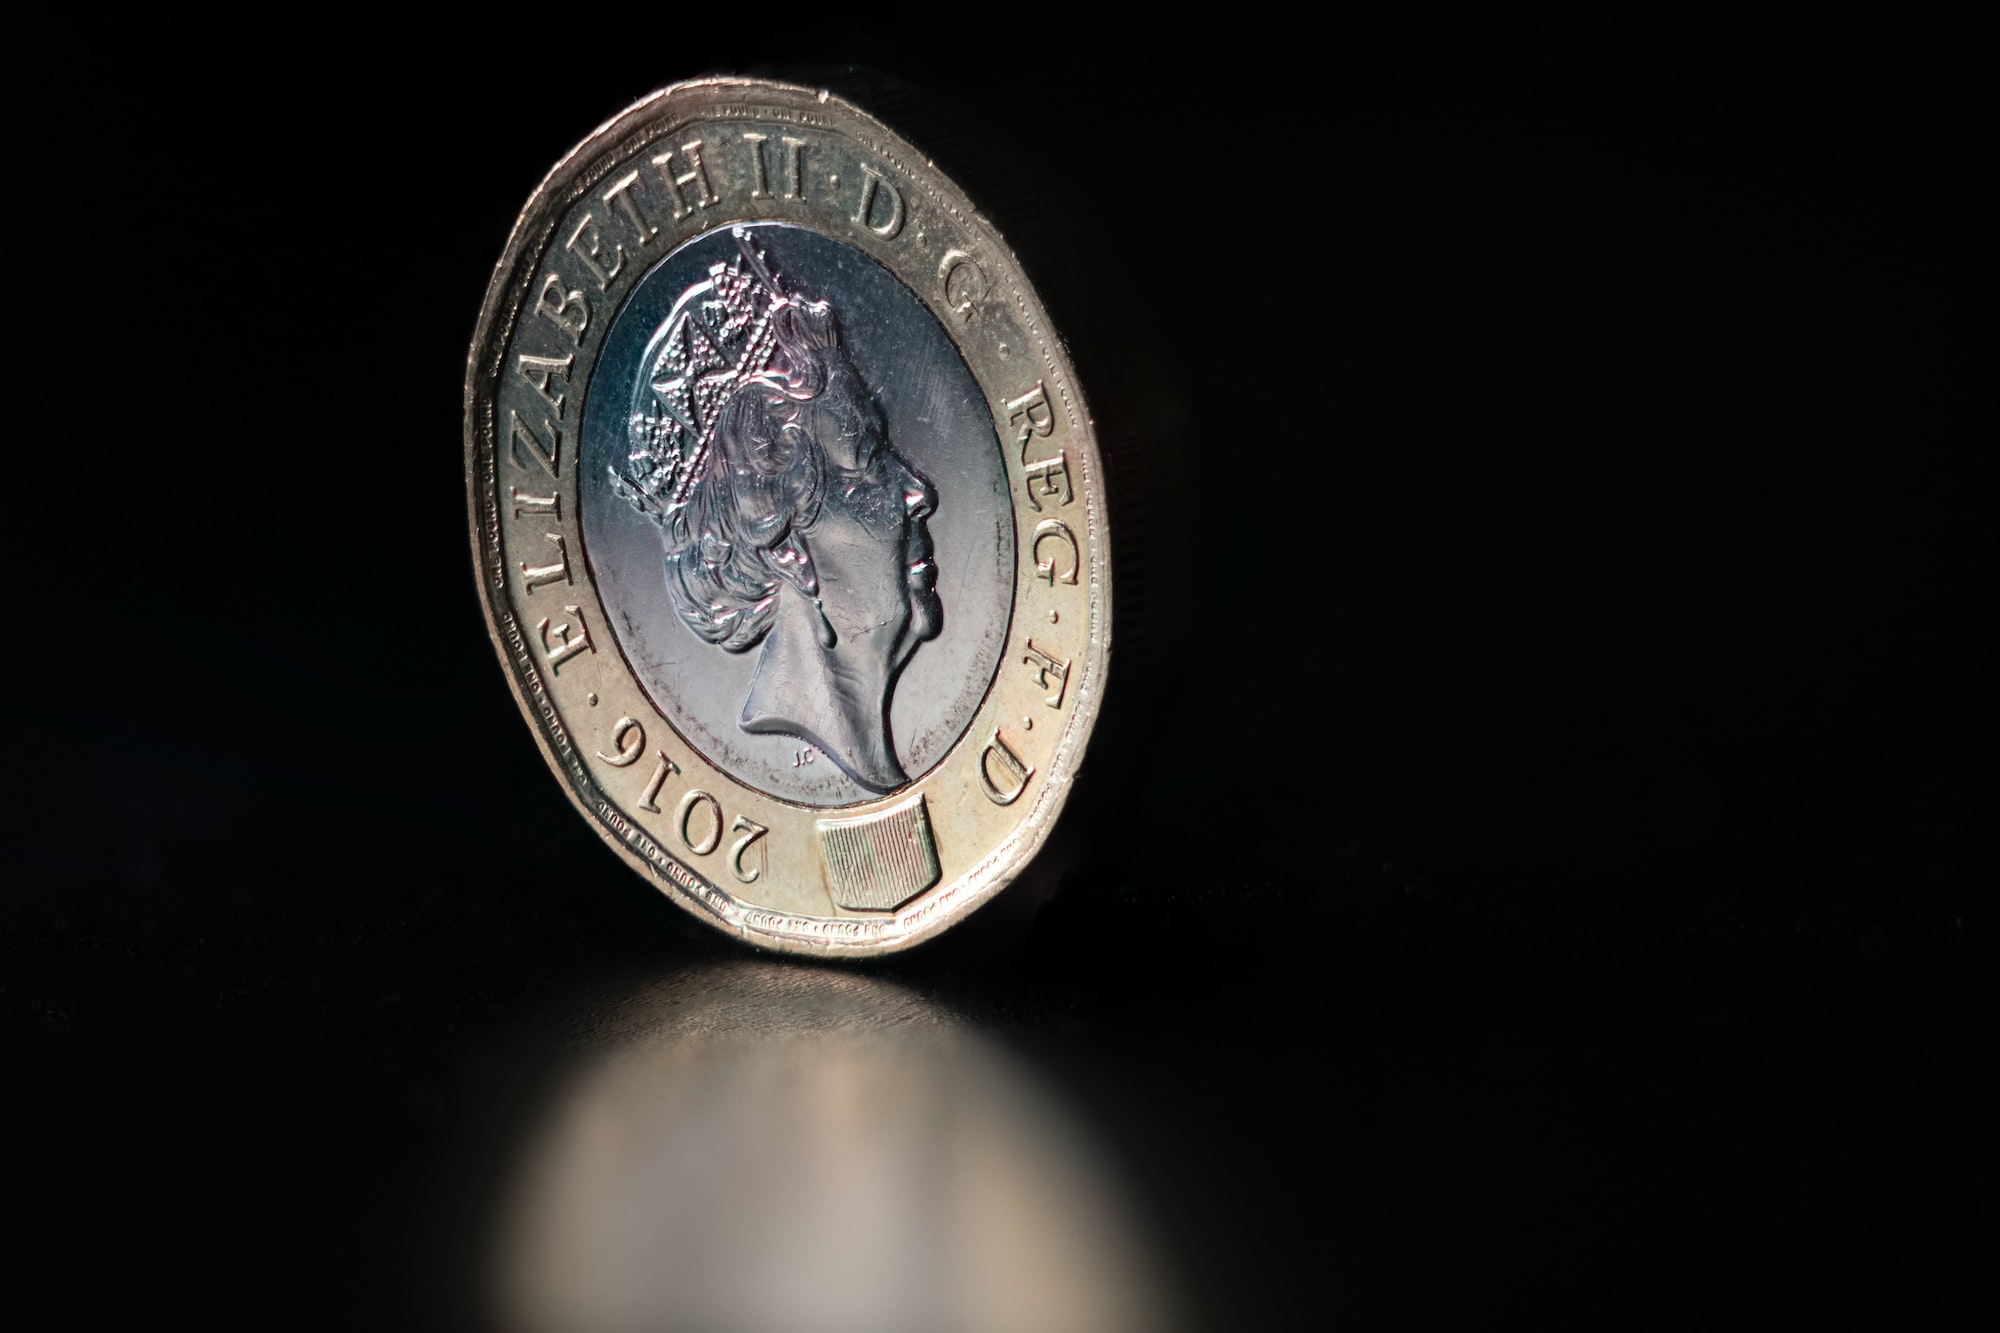 A little bit of hope for the British Pound